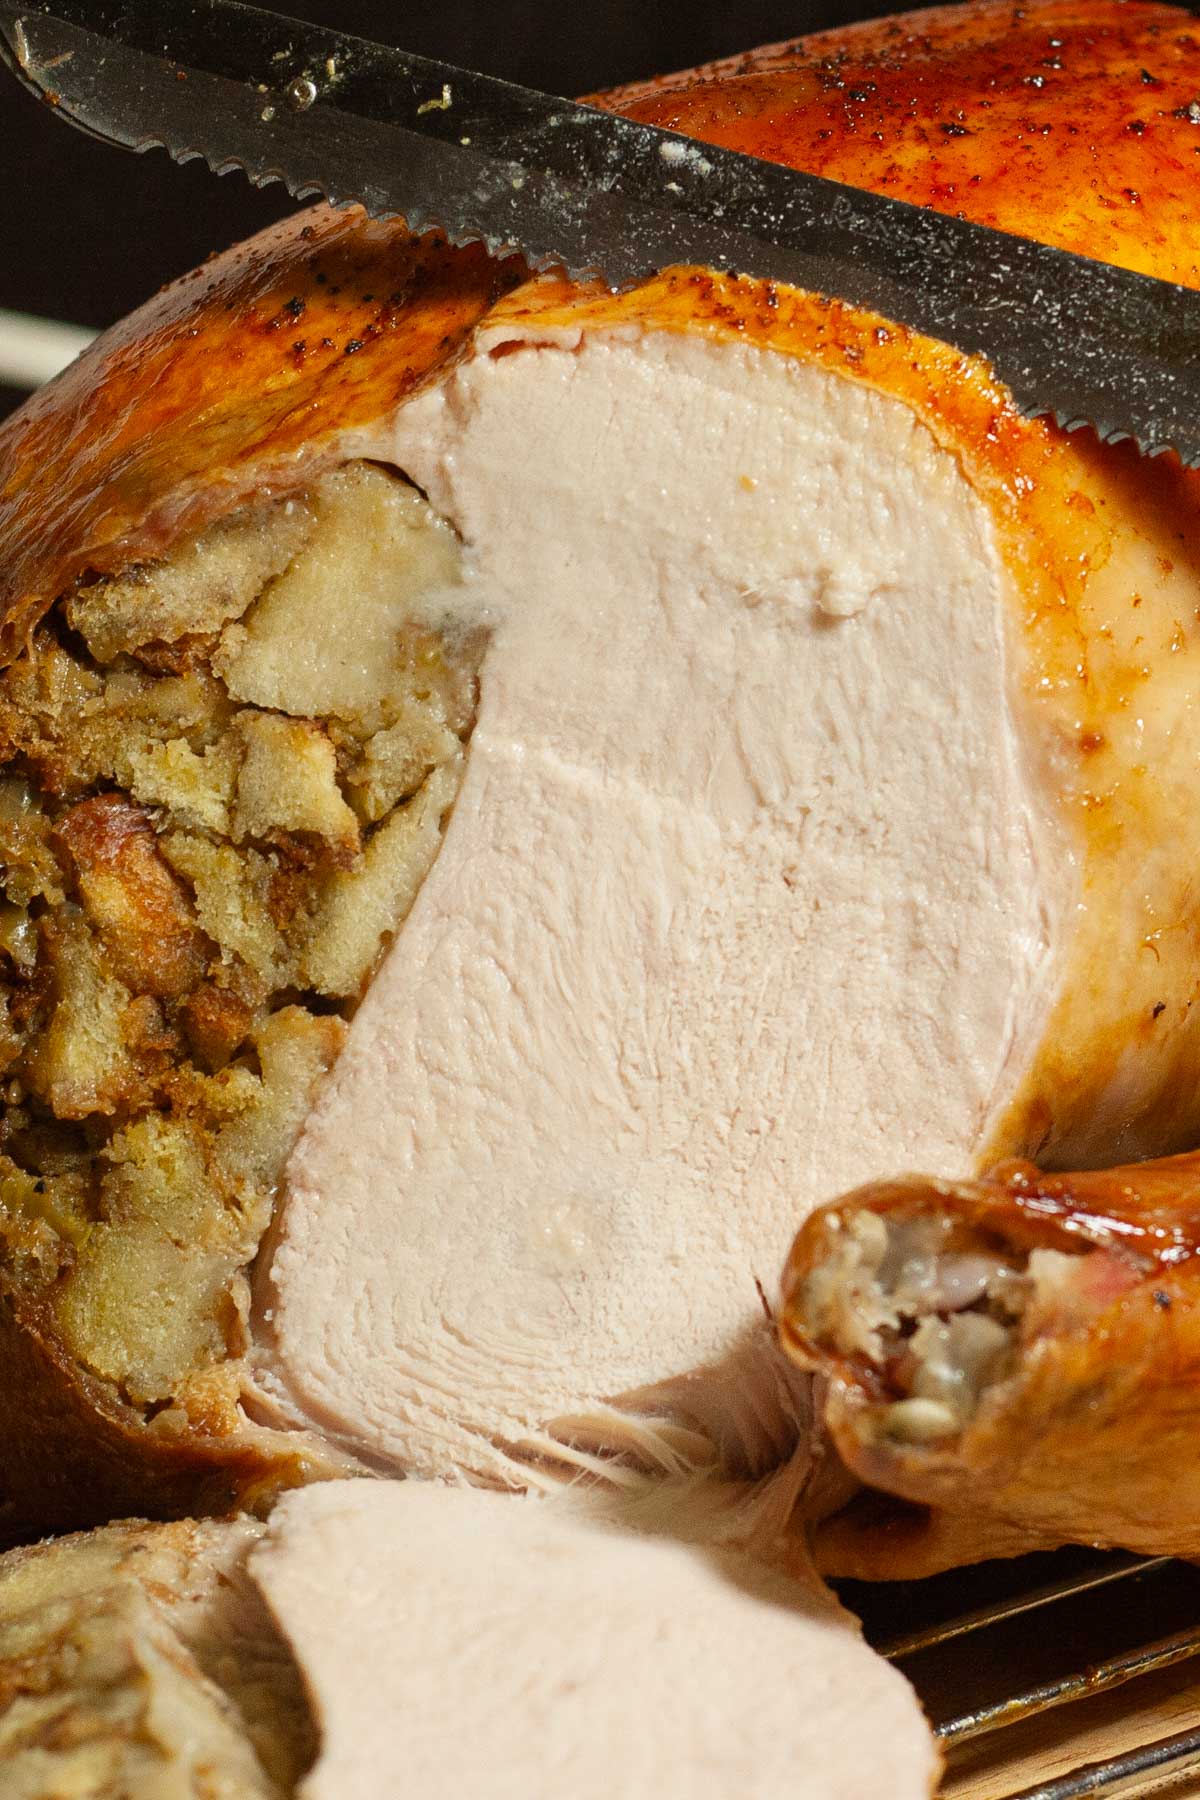 Sliced toasted turkey with layer of stuffing.